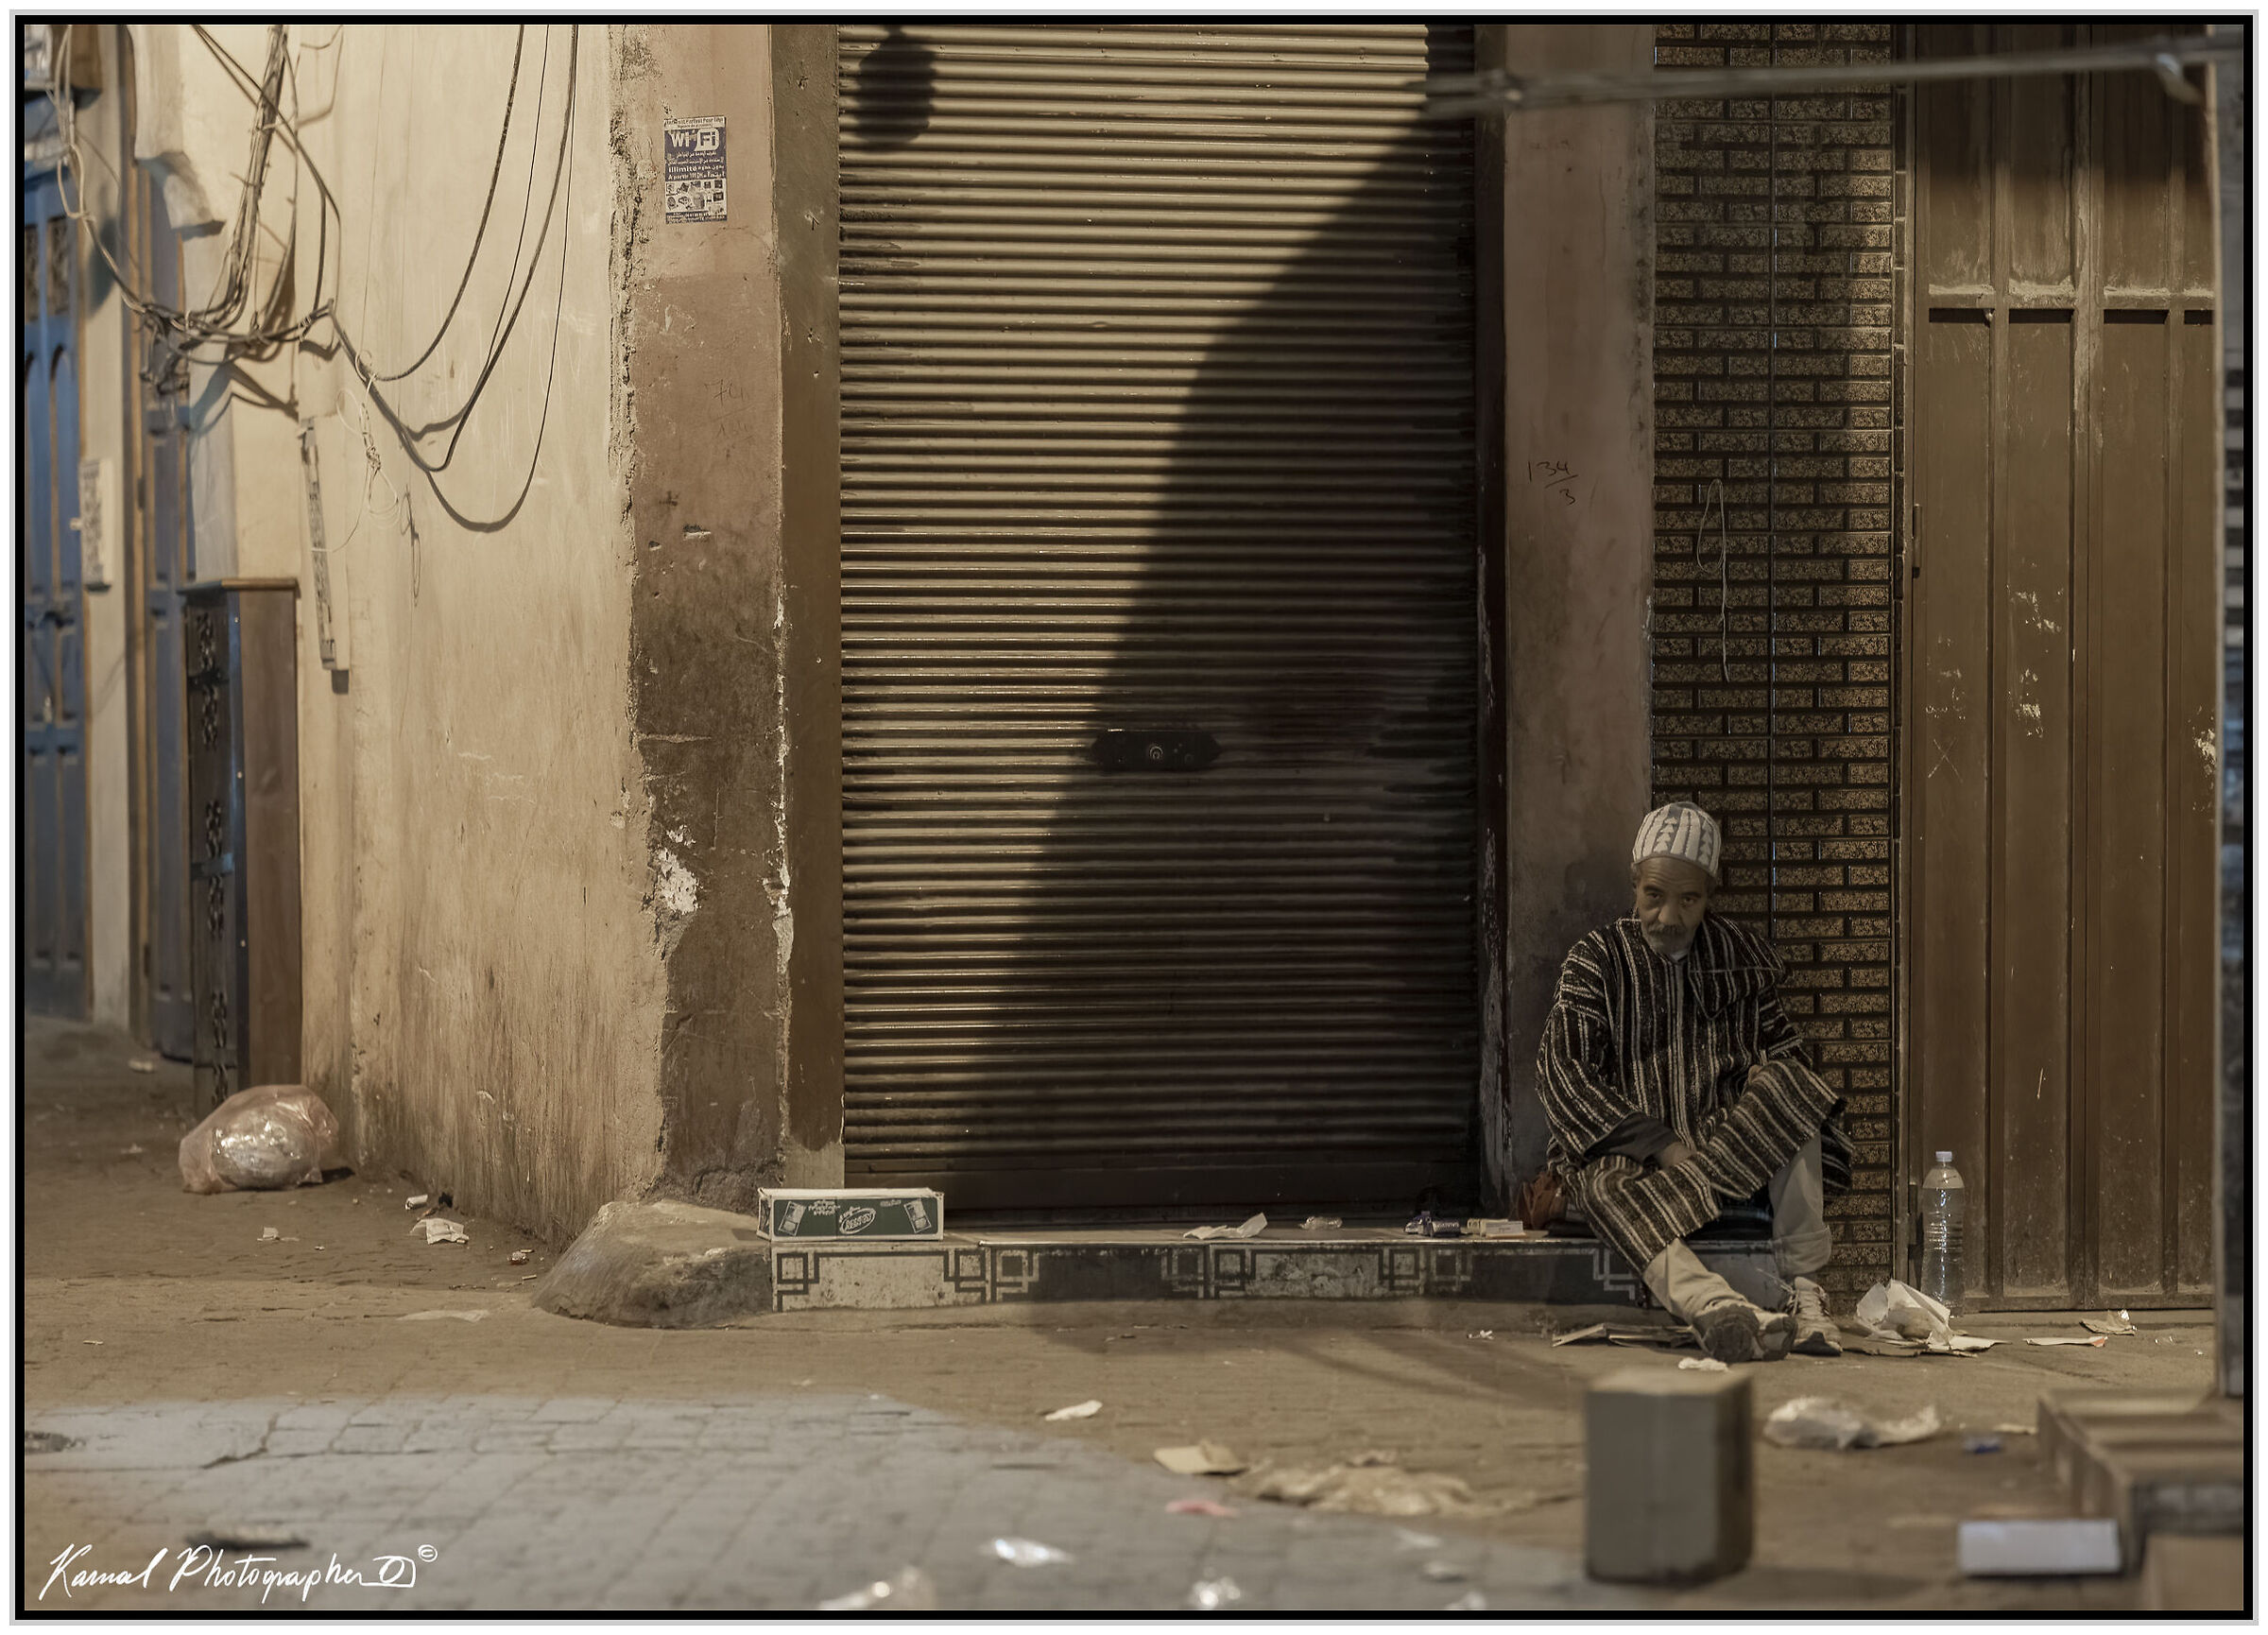 On the streets of Marrakech...